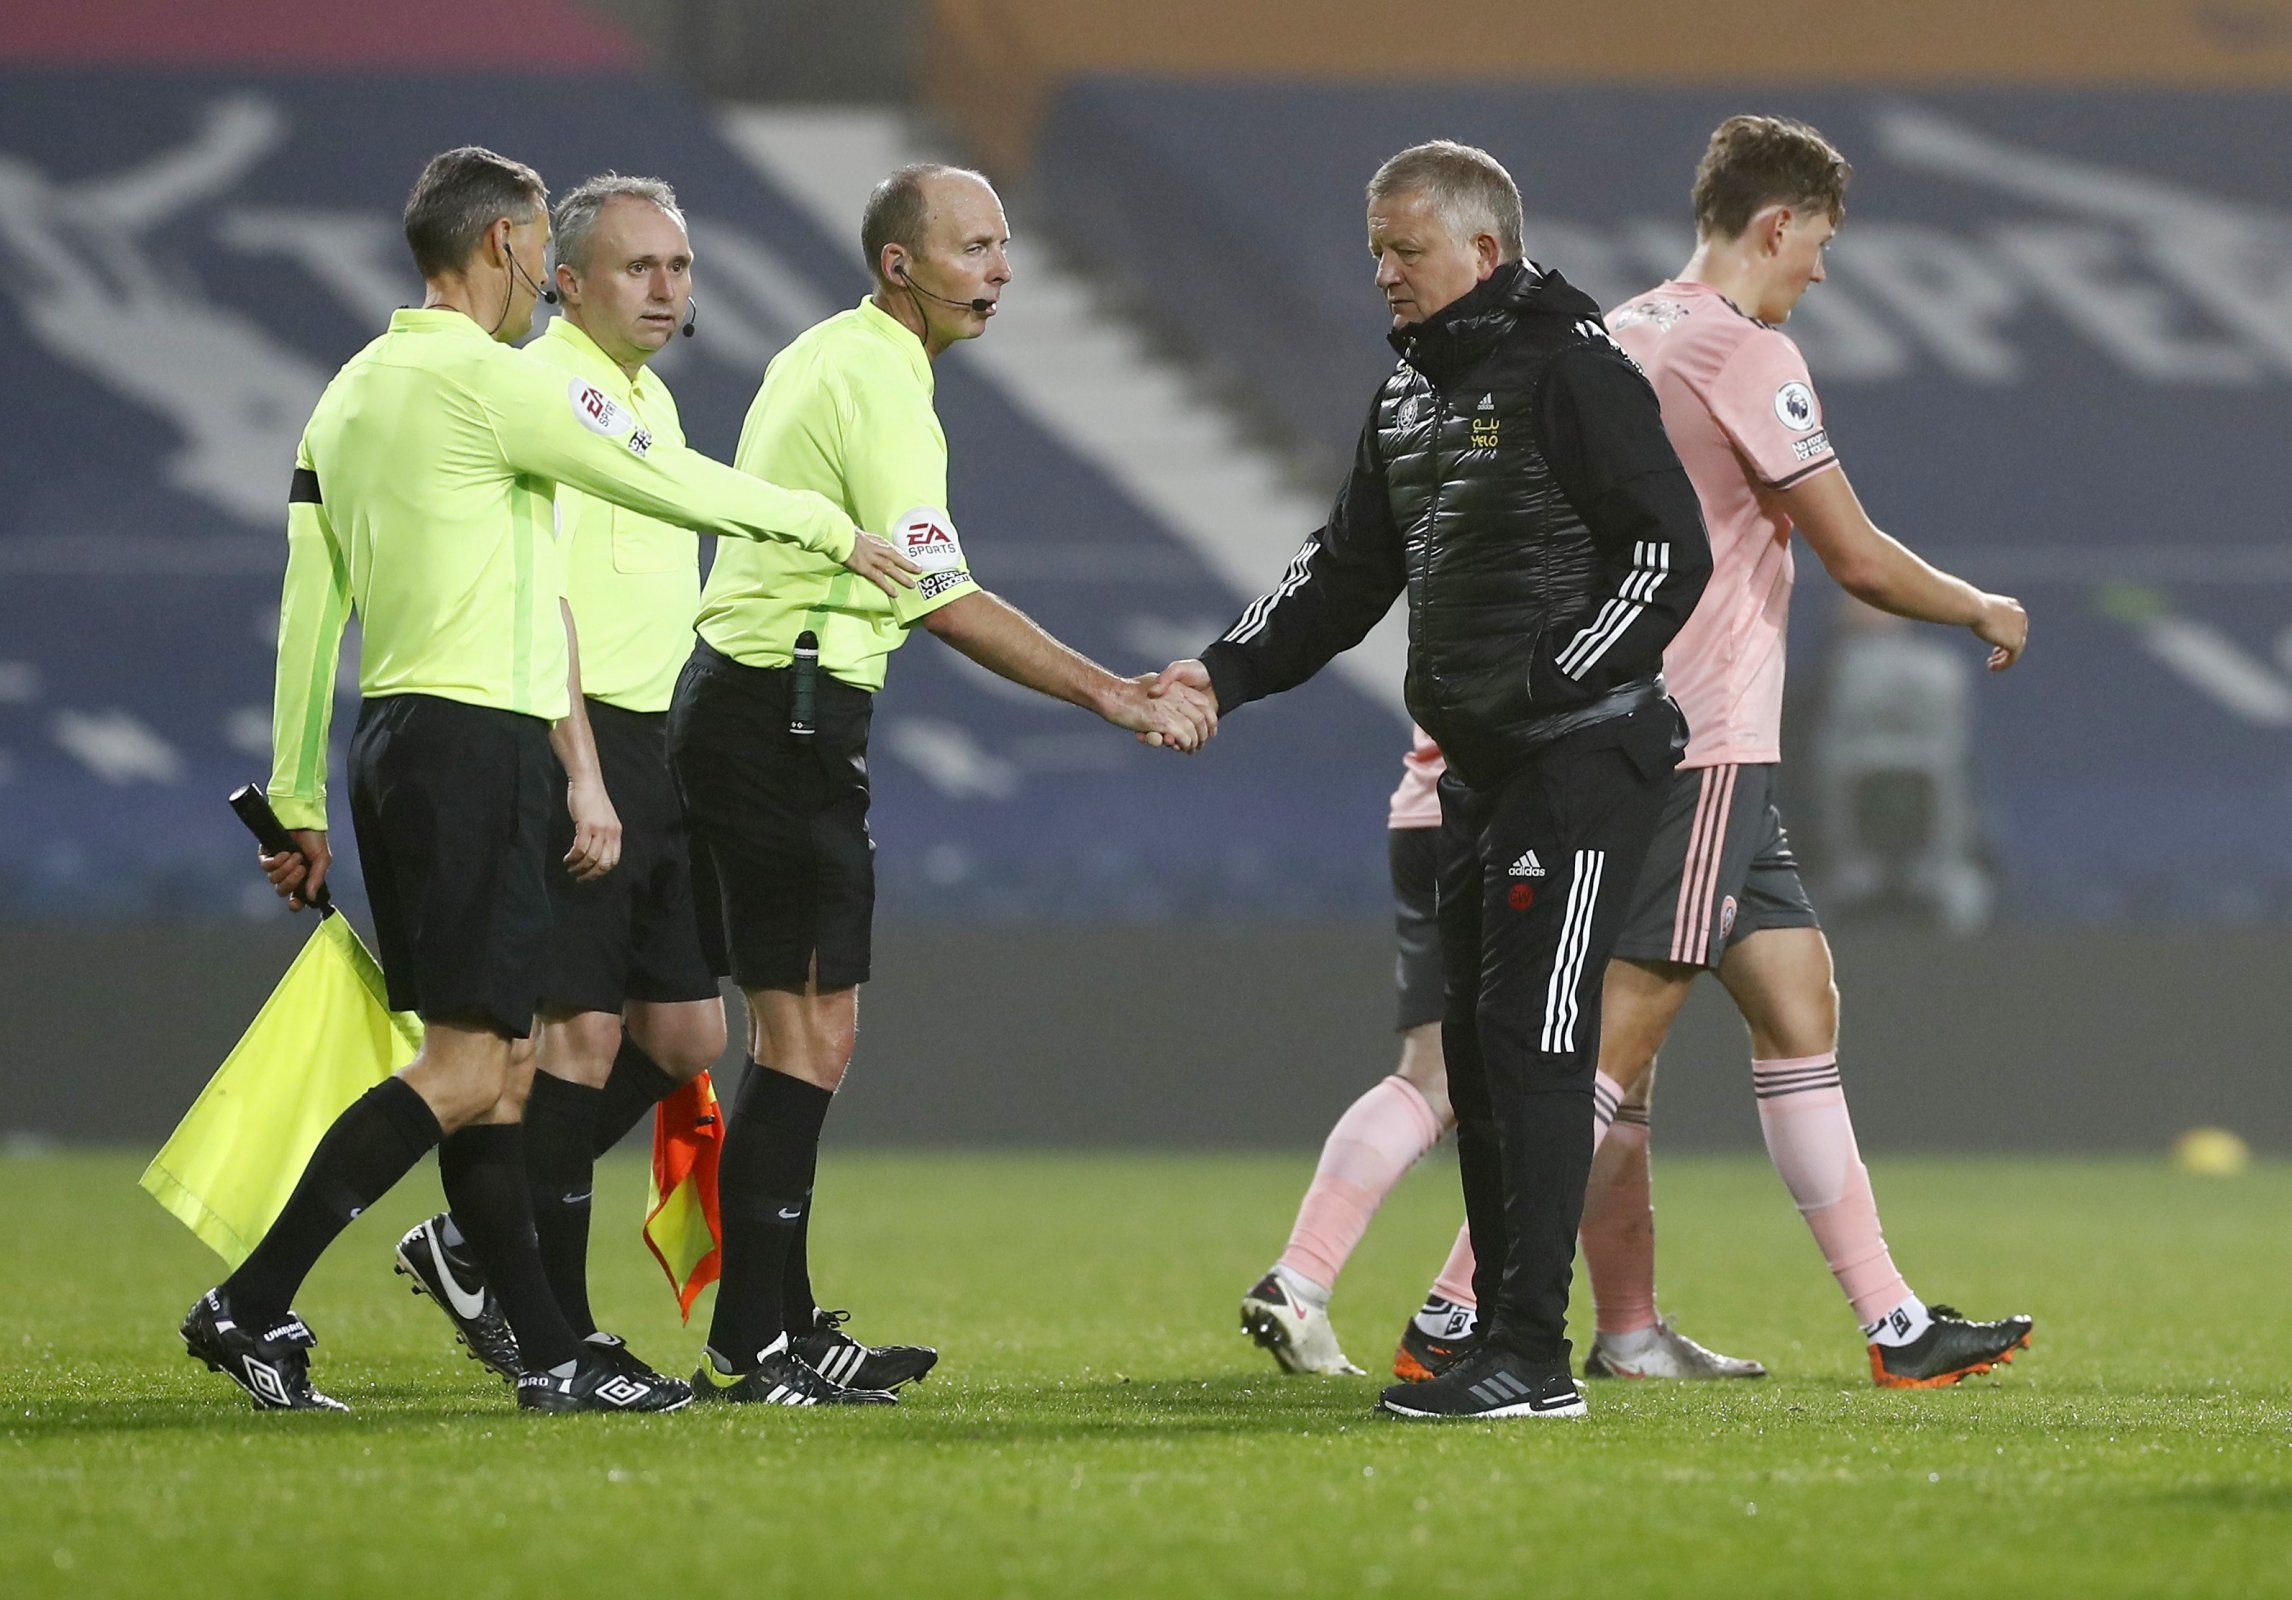 former sheffield united manager chris wilder mike dean end of match vs west brom hawthorns premier league